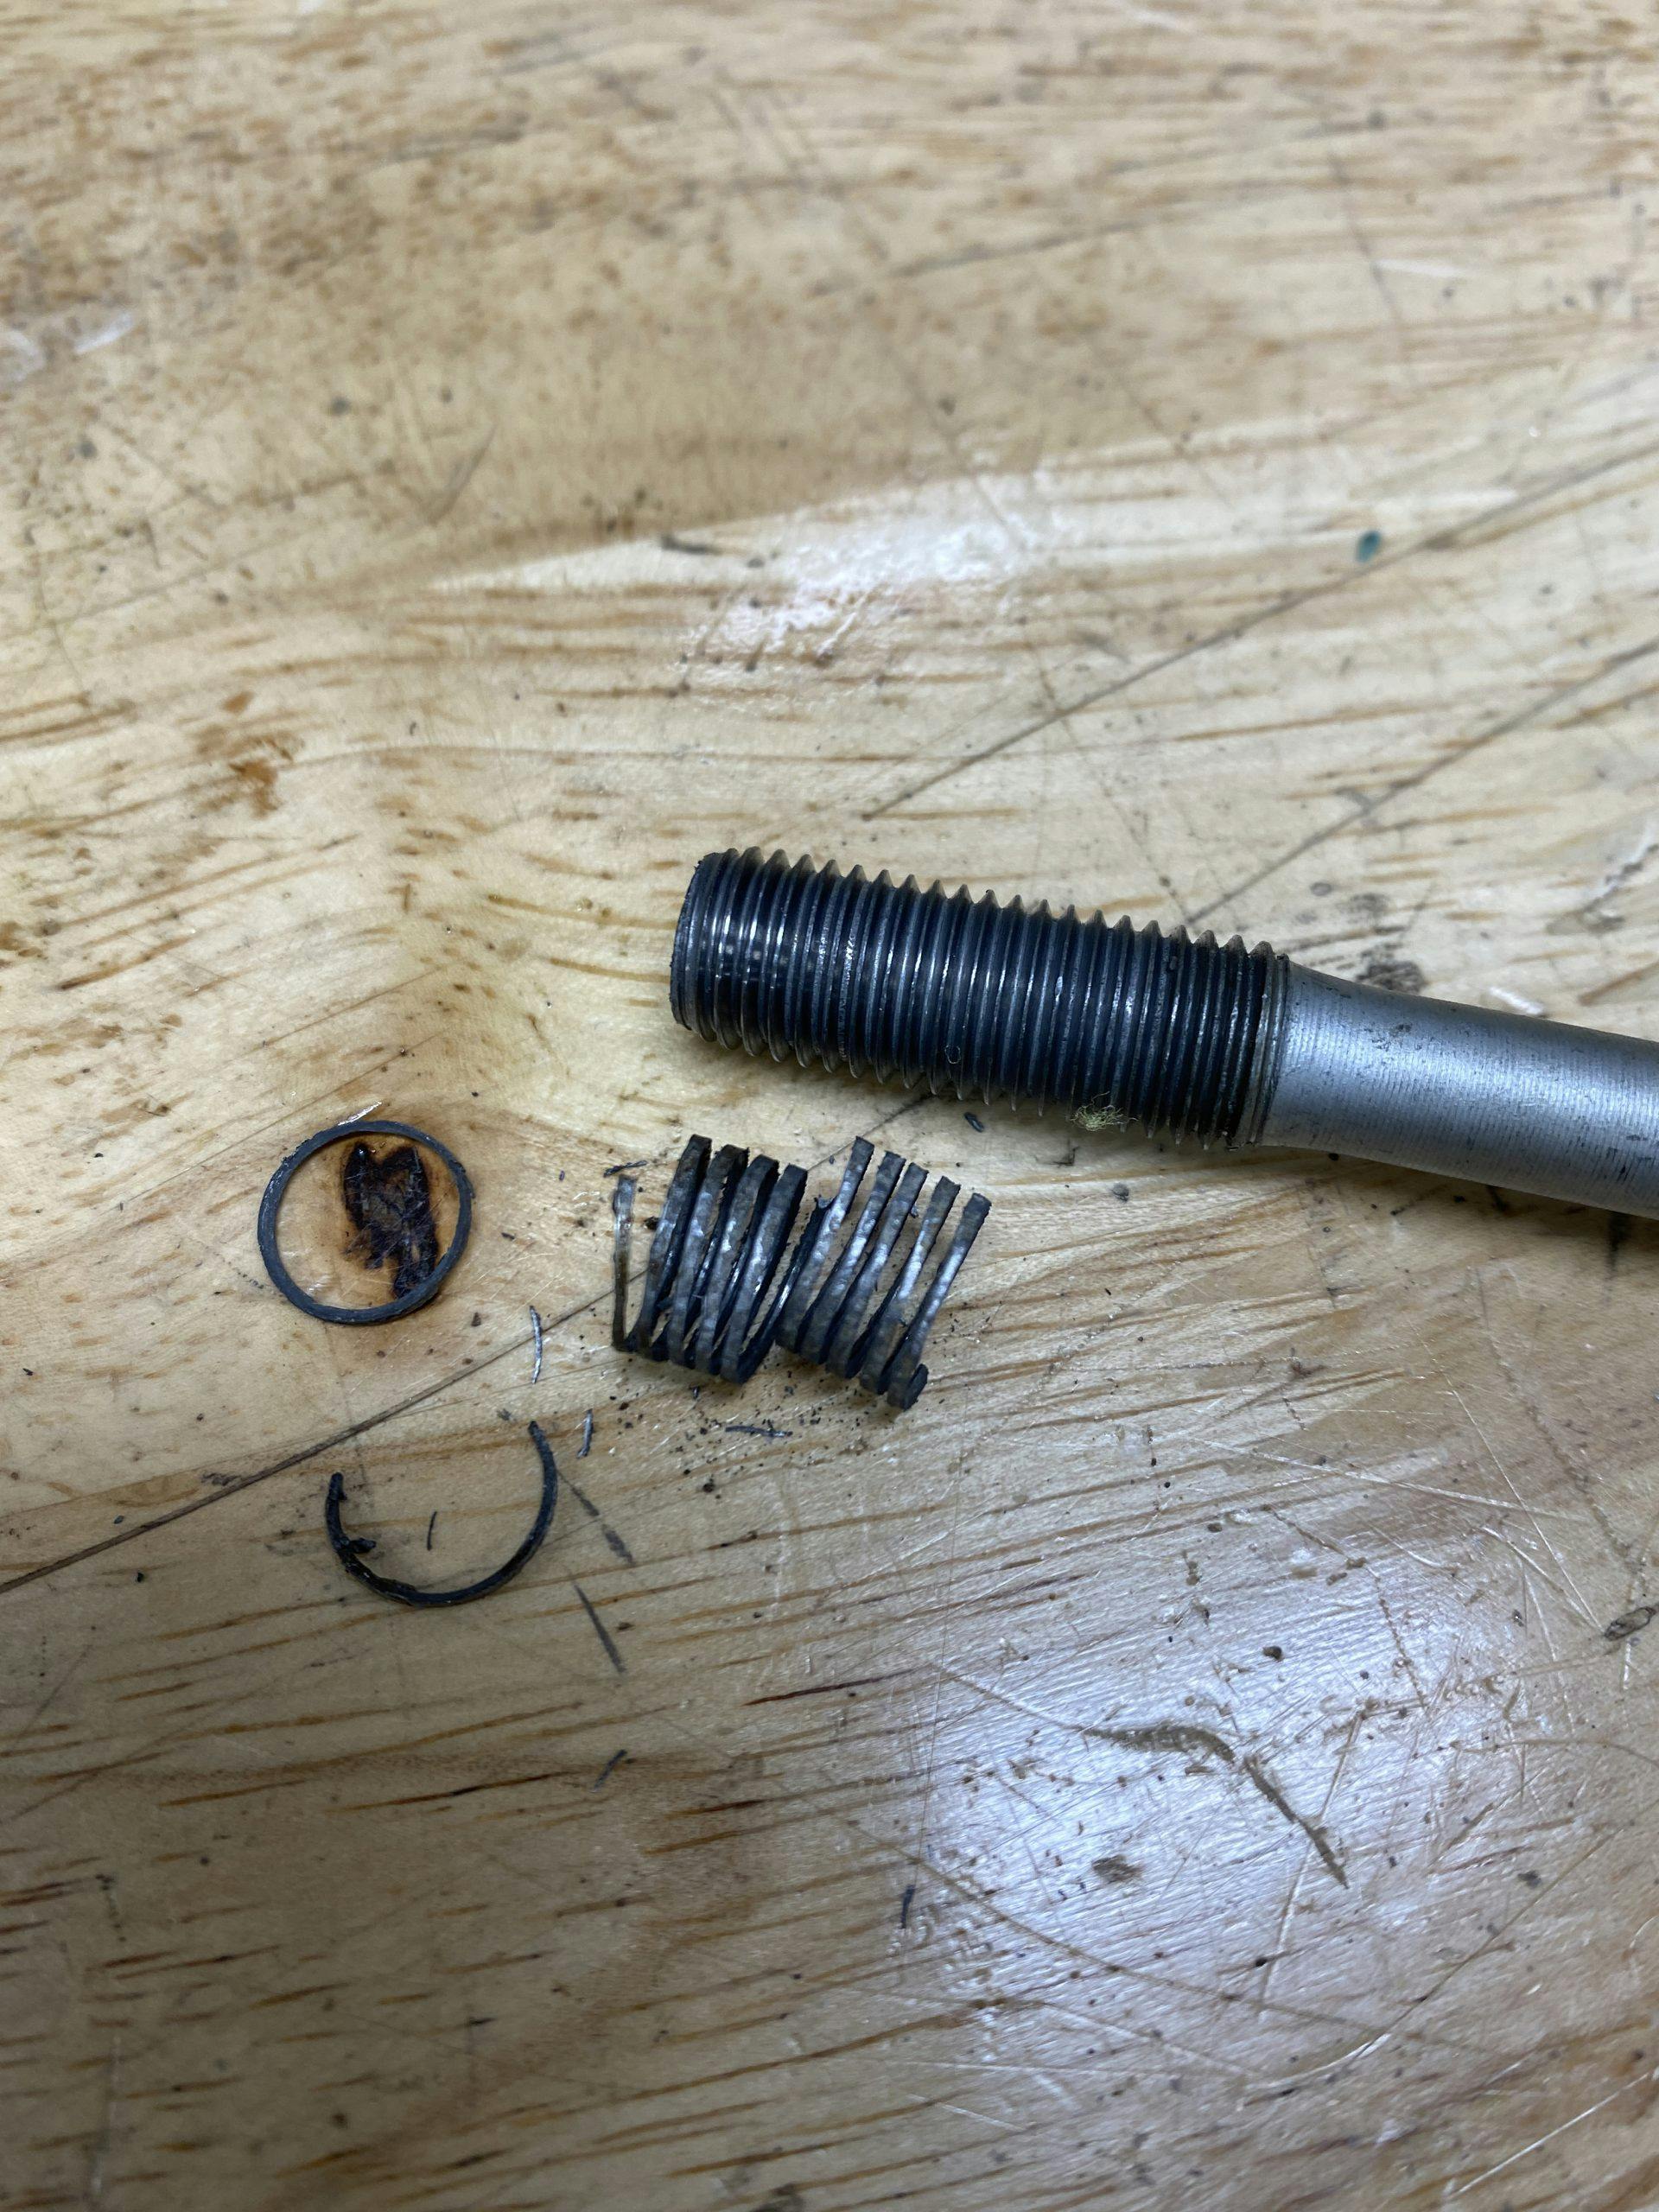 xr250 pulled threads on bench